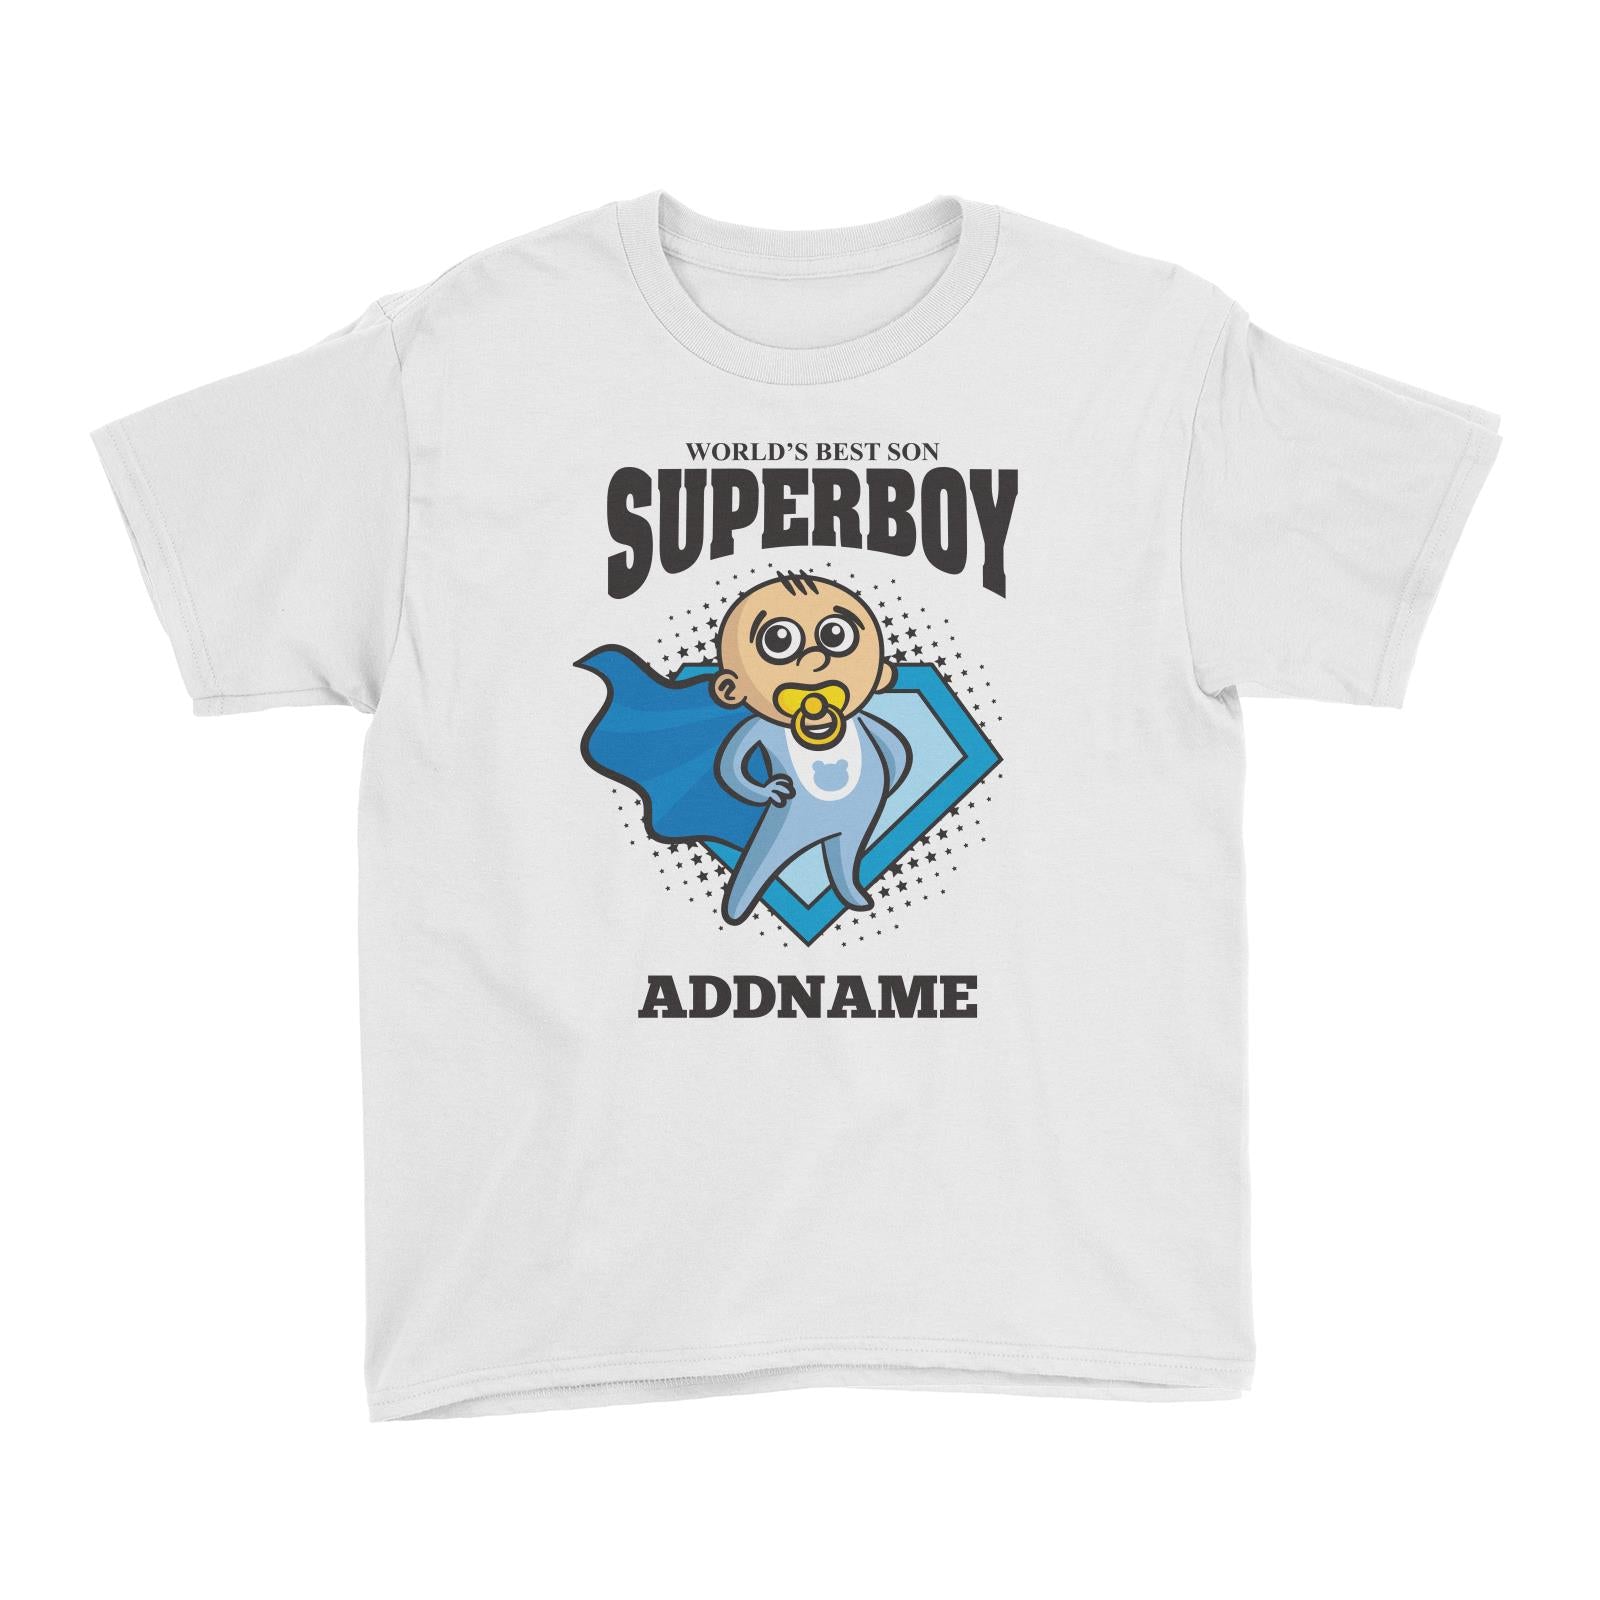 Best Son Superboy Baby (FLASH DEAL) Kid's T-Shirt Personalizable Designs Matching Family Superhero Family Edition Superhero